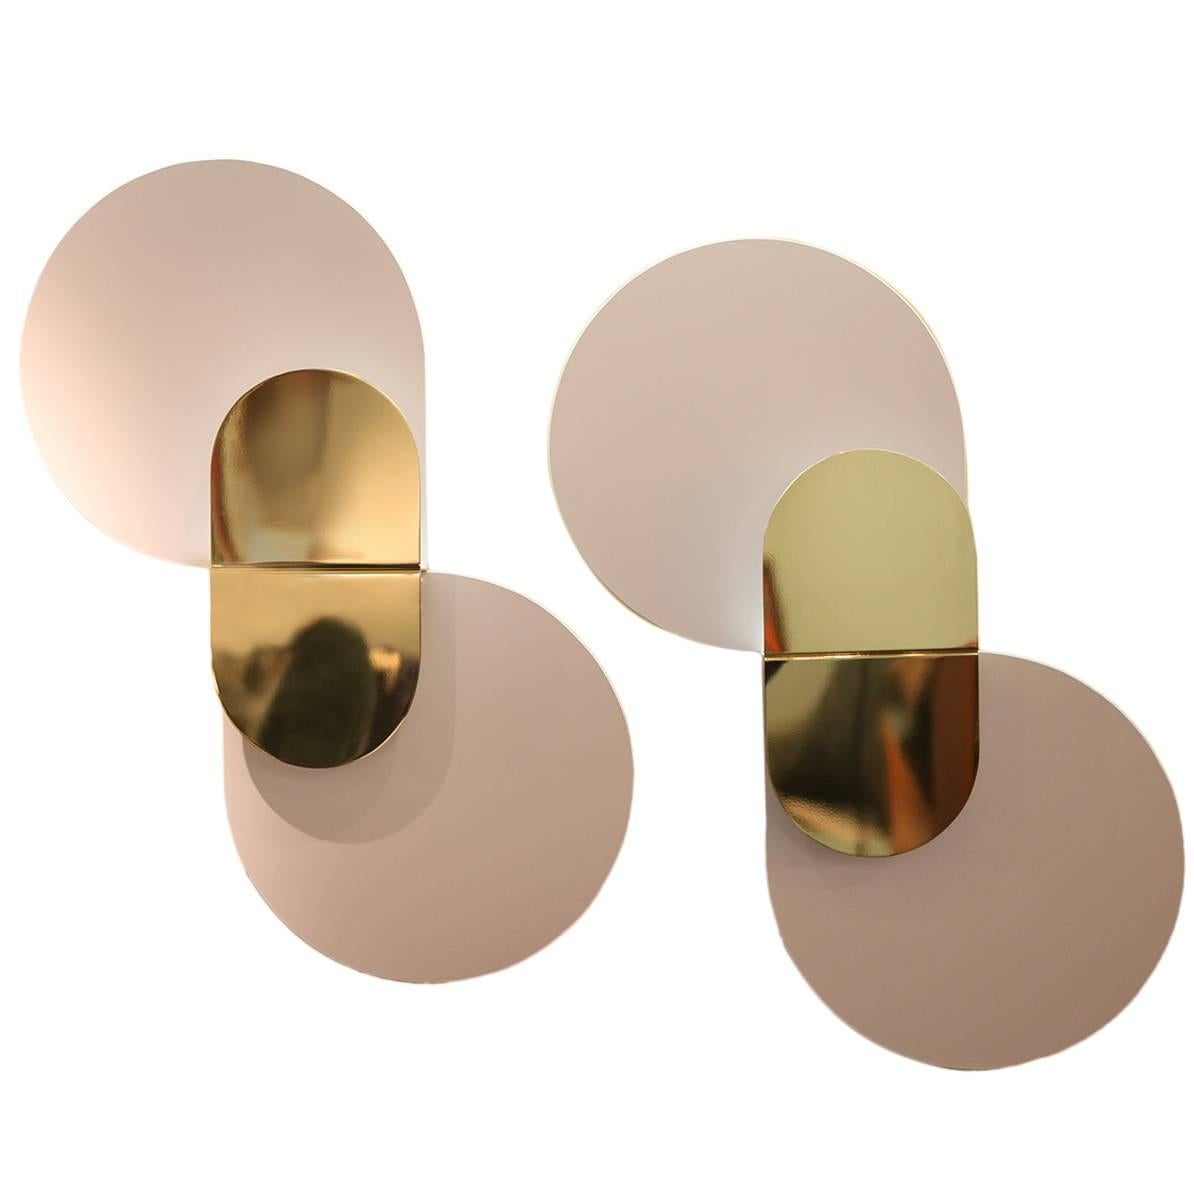 Pair of Wall Lights by Giannino Crippa for Lumi Milano, 1970 For Sale